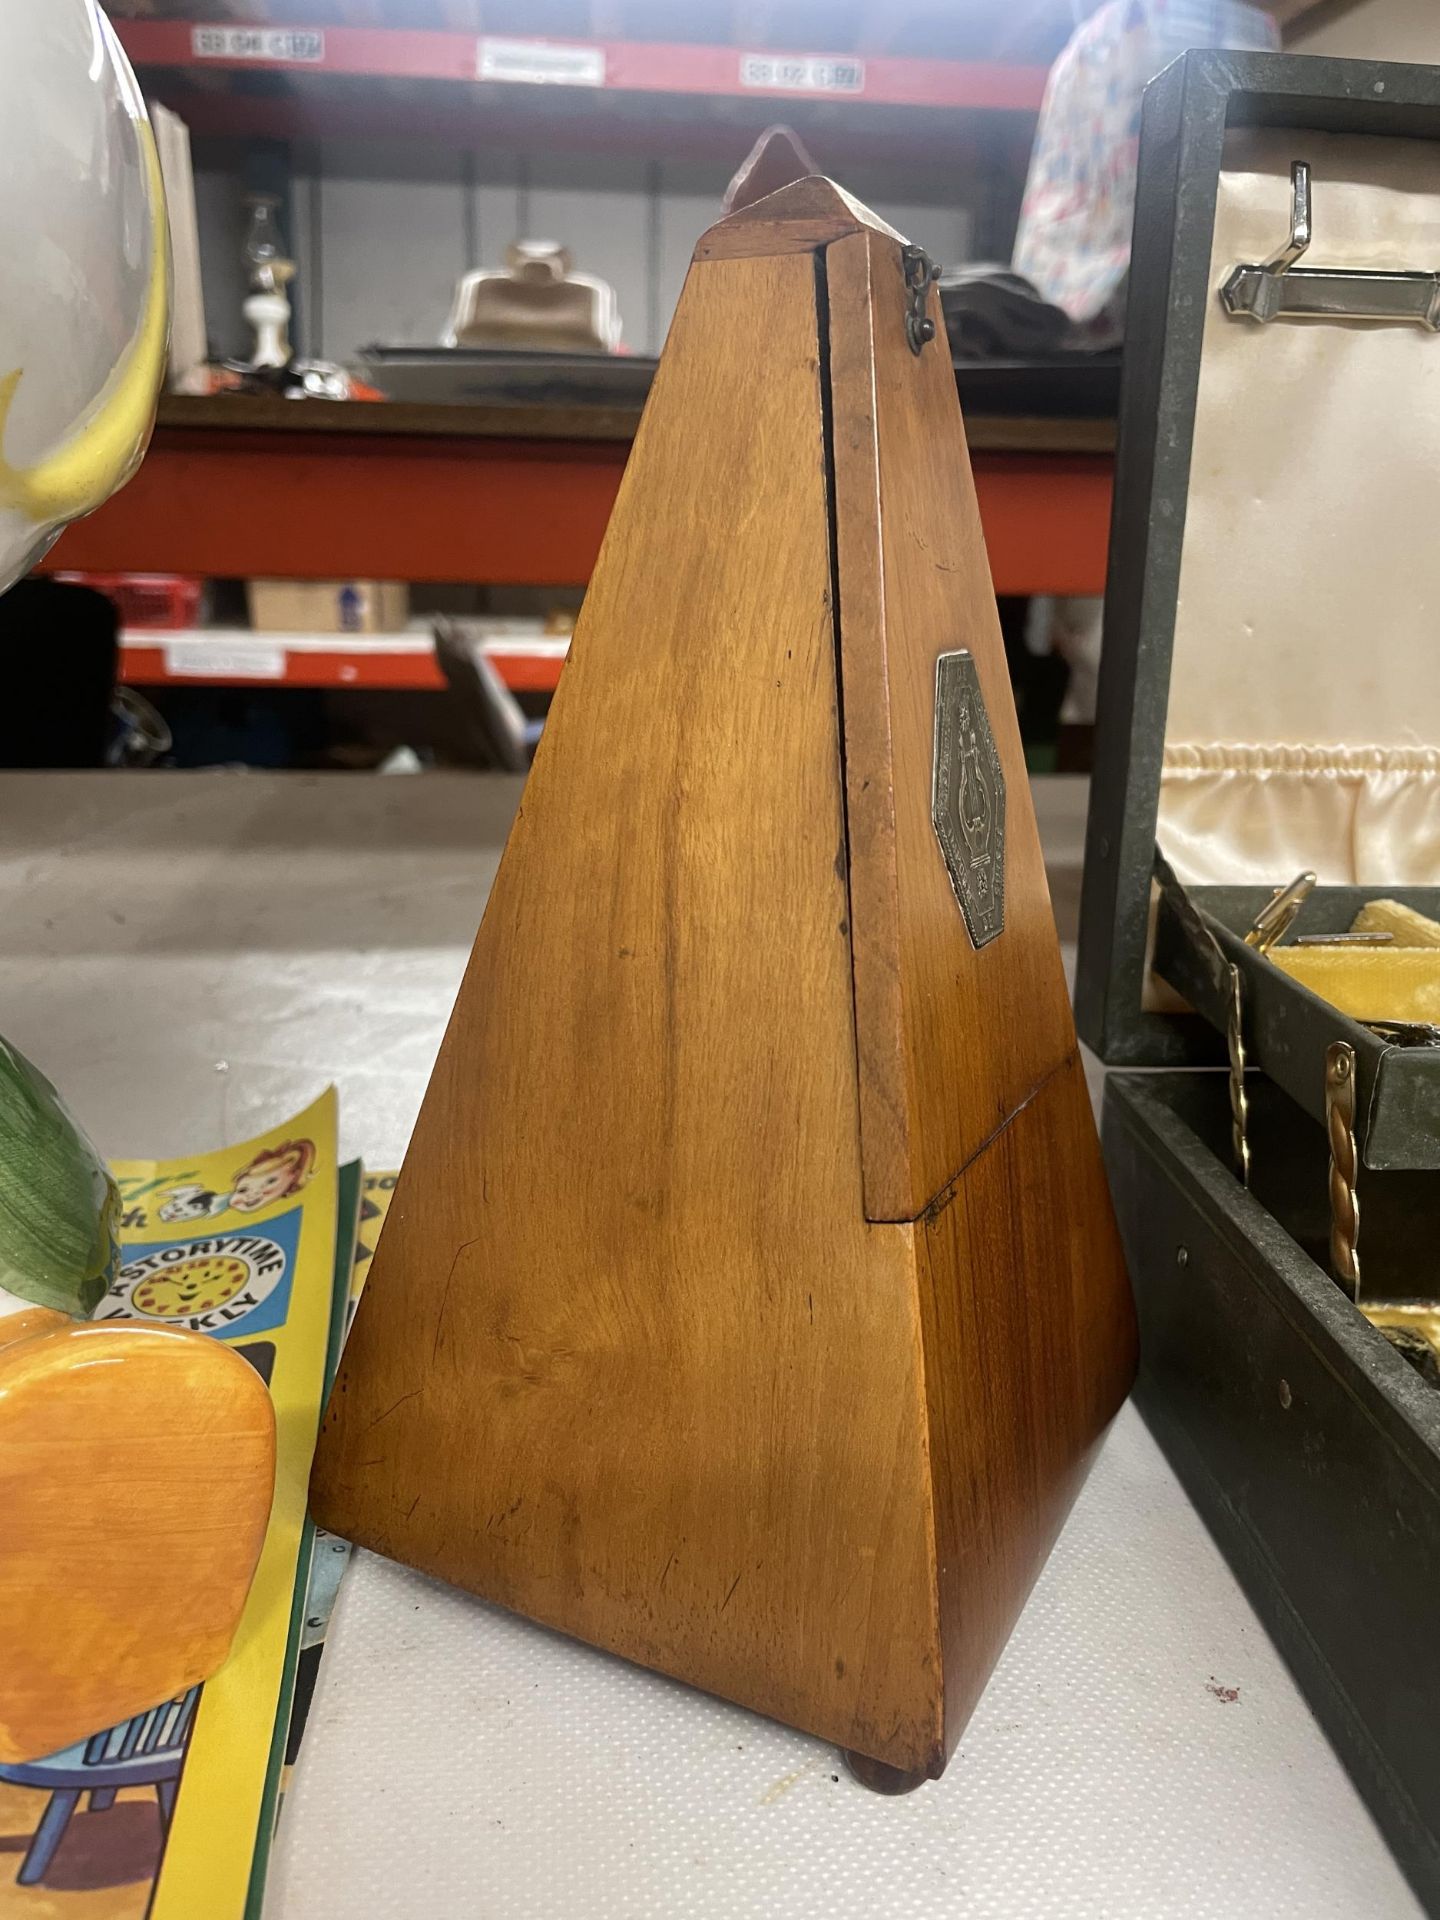 A VINTAGE SWISS WOODEN METRONOME - Image 3 of 3